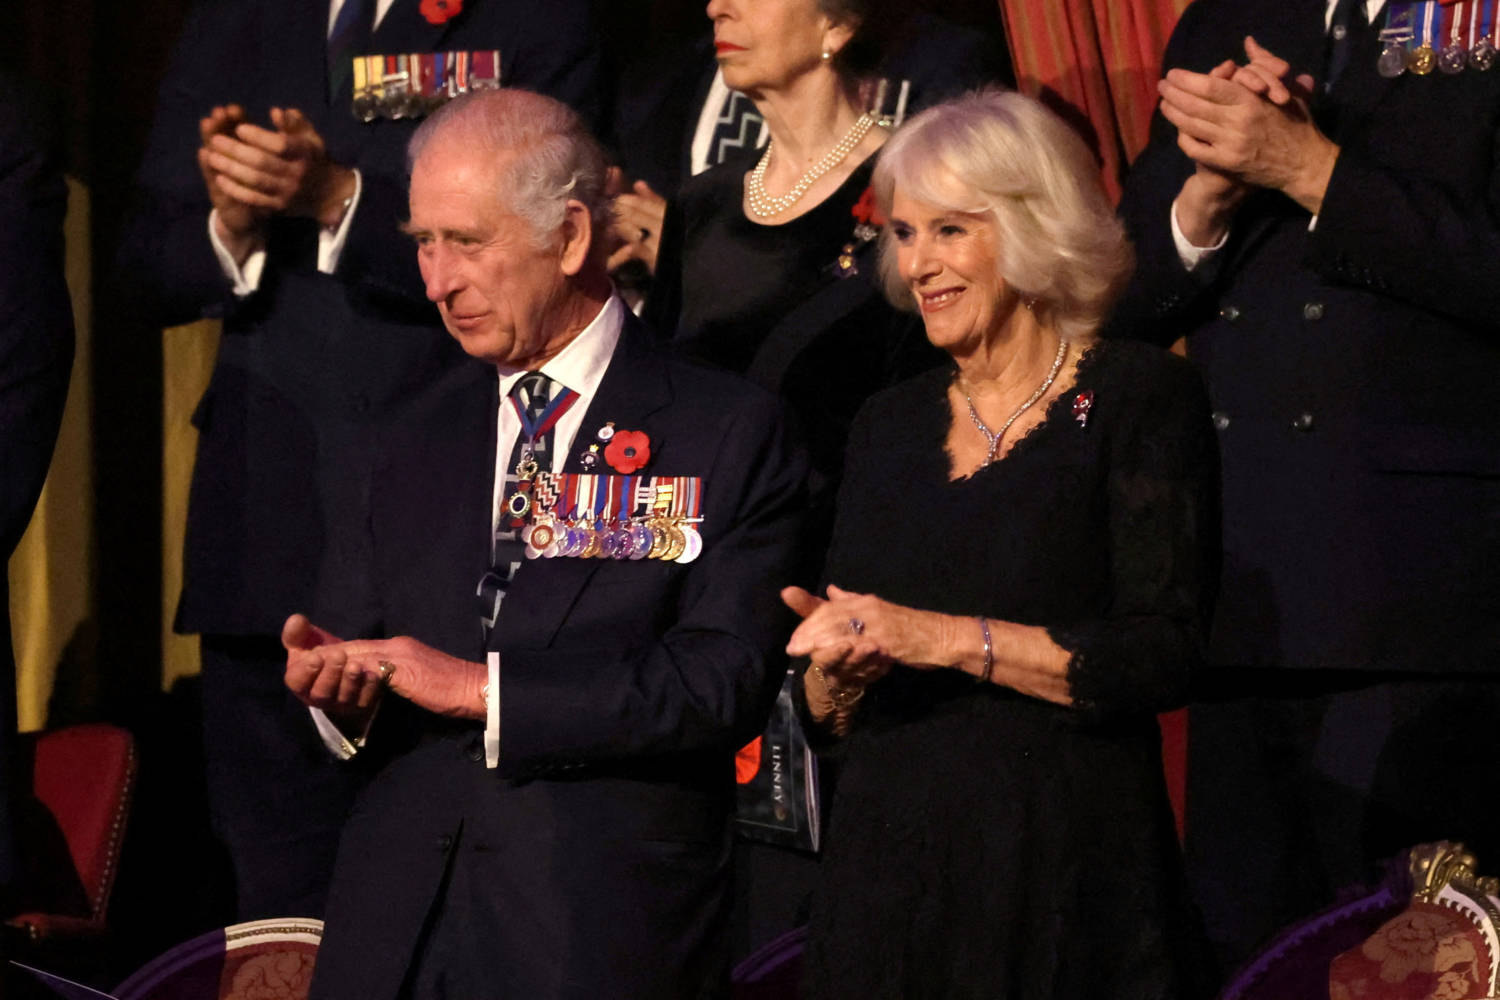 File Photo: The British Royal Family Attend The Royal British Legion Festival Of Remembrance